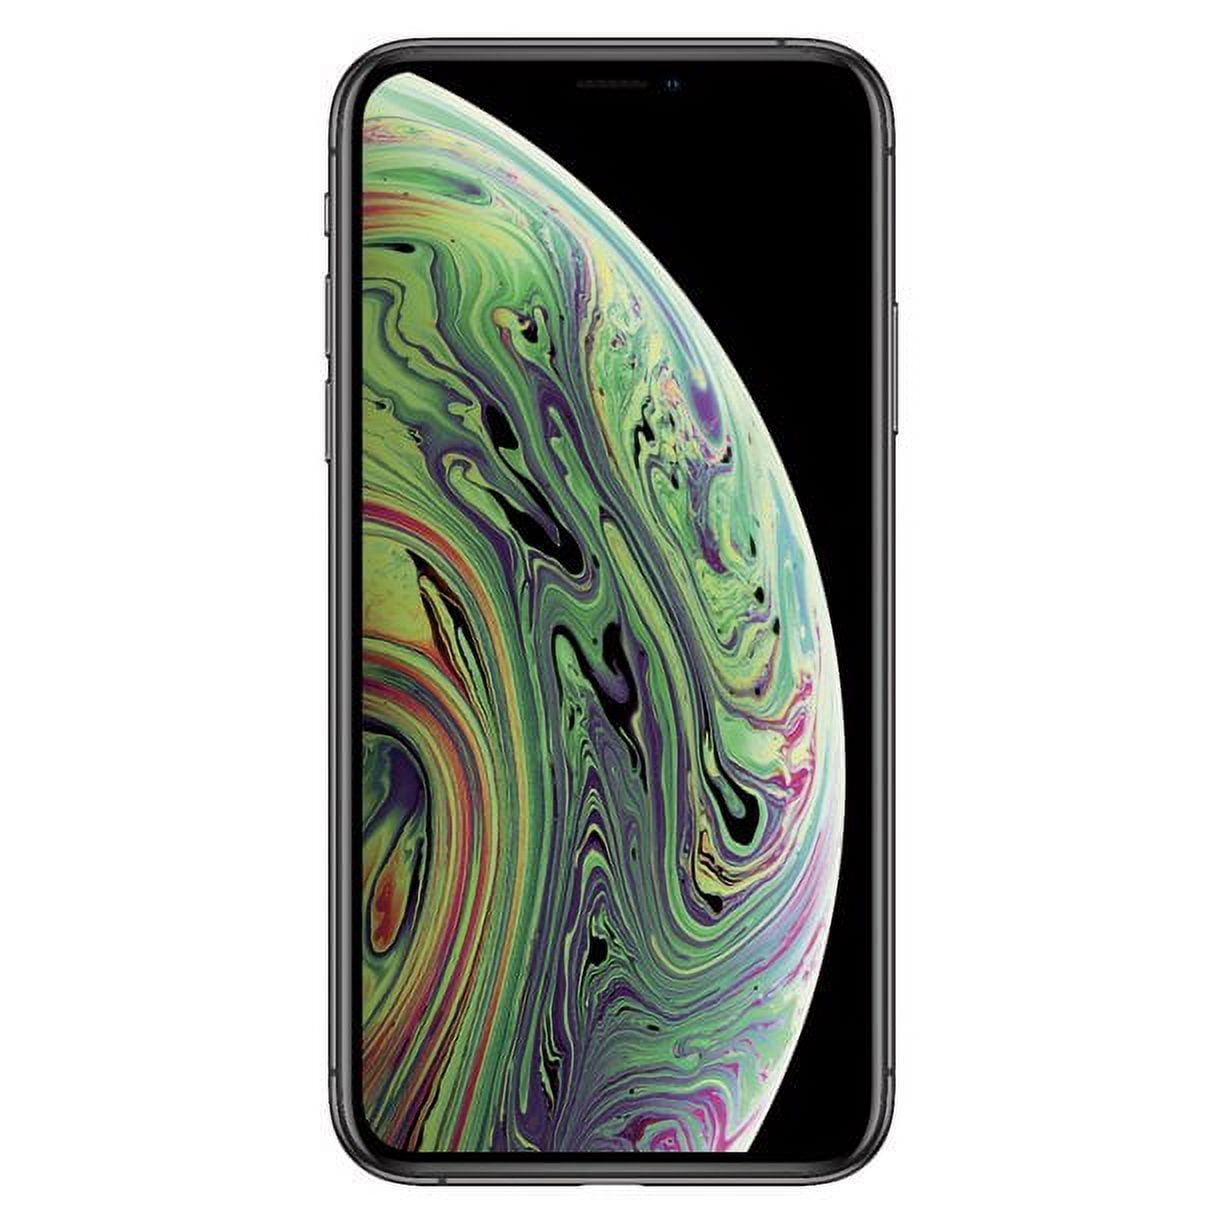 Restored Apple iPhone XS, 256 GB, Space Gray - Fully Unlocked - GSM and  CDMA compatible (Refurbished)